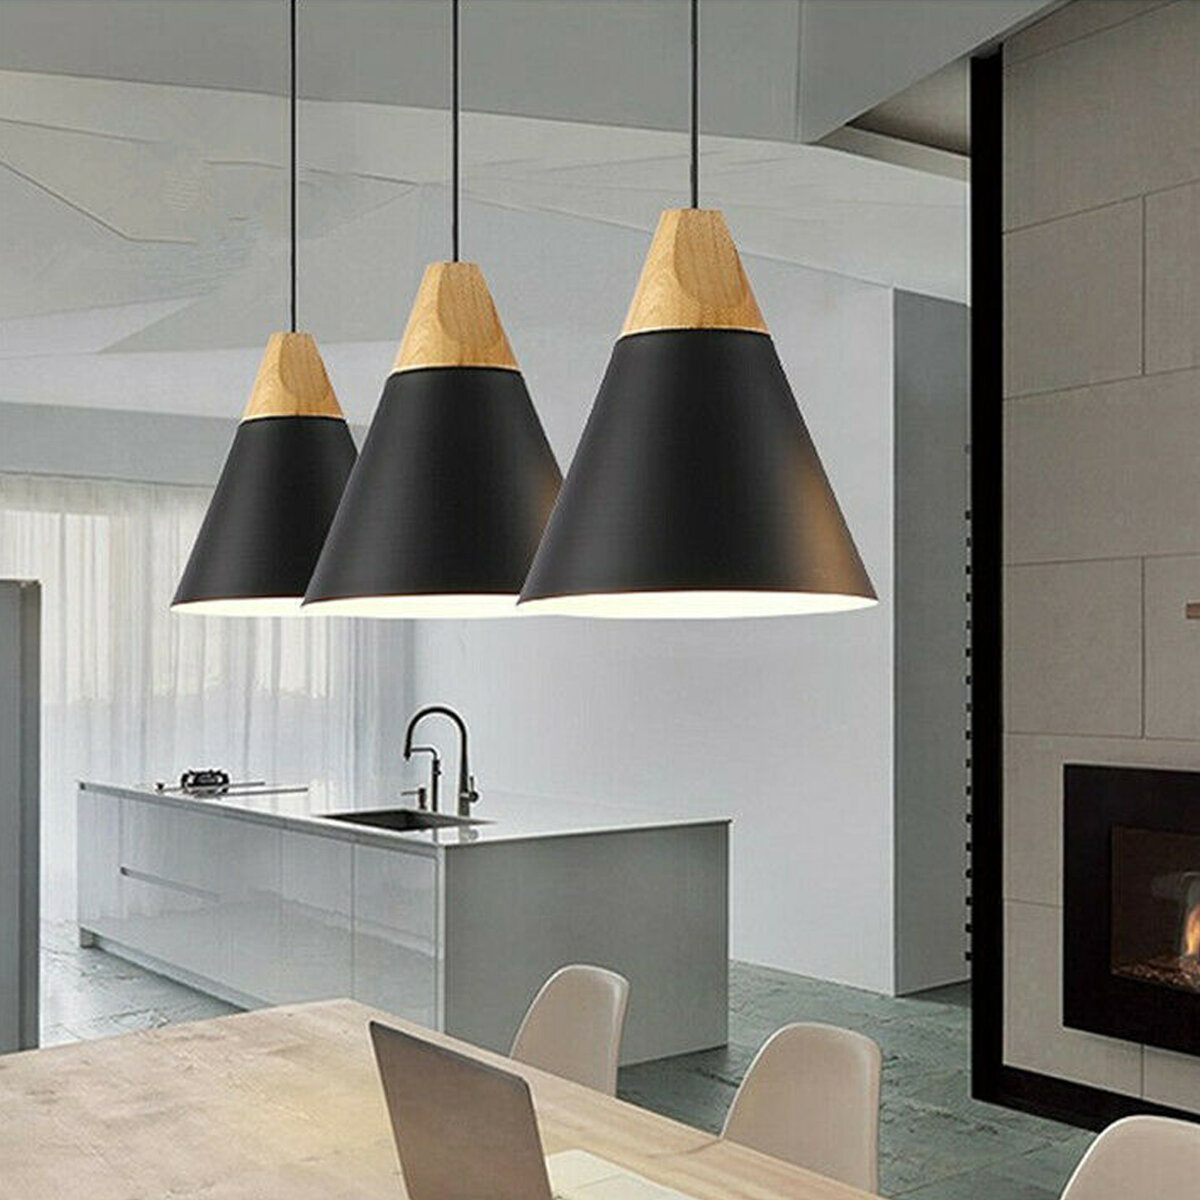 Modern Pendant Lighting Nordic, Height Of Pendant Lights Over Dining Table